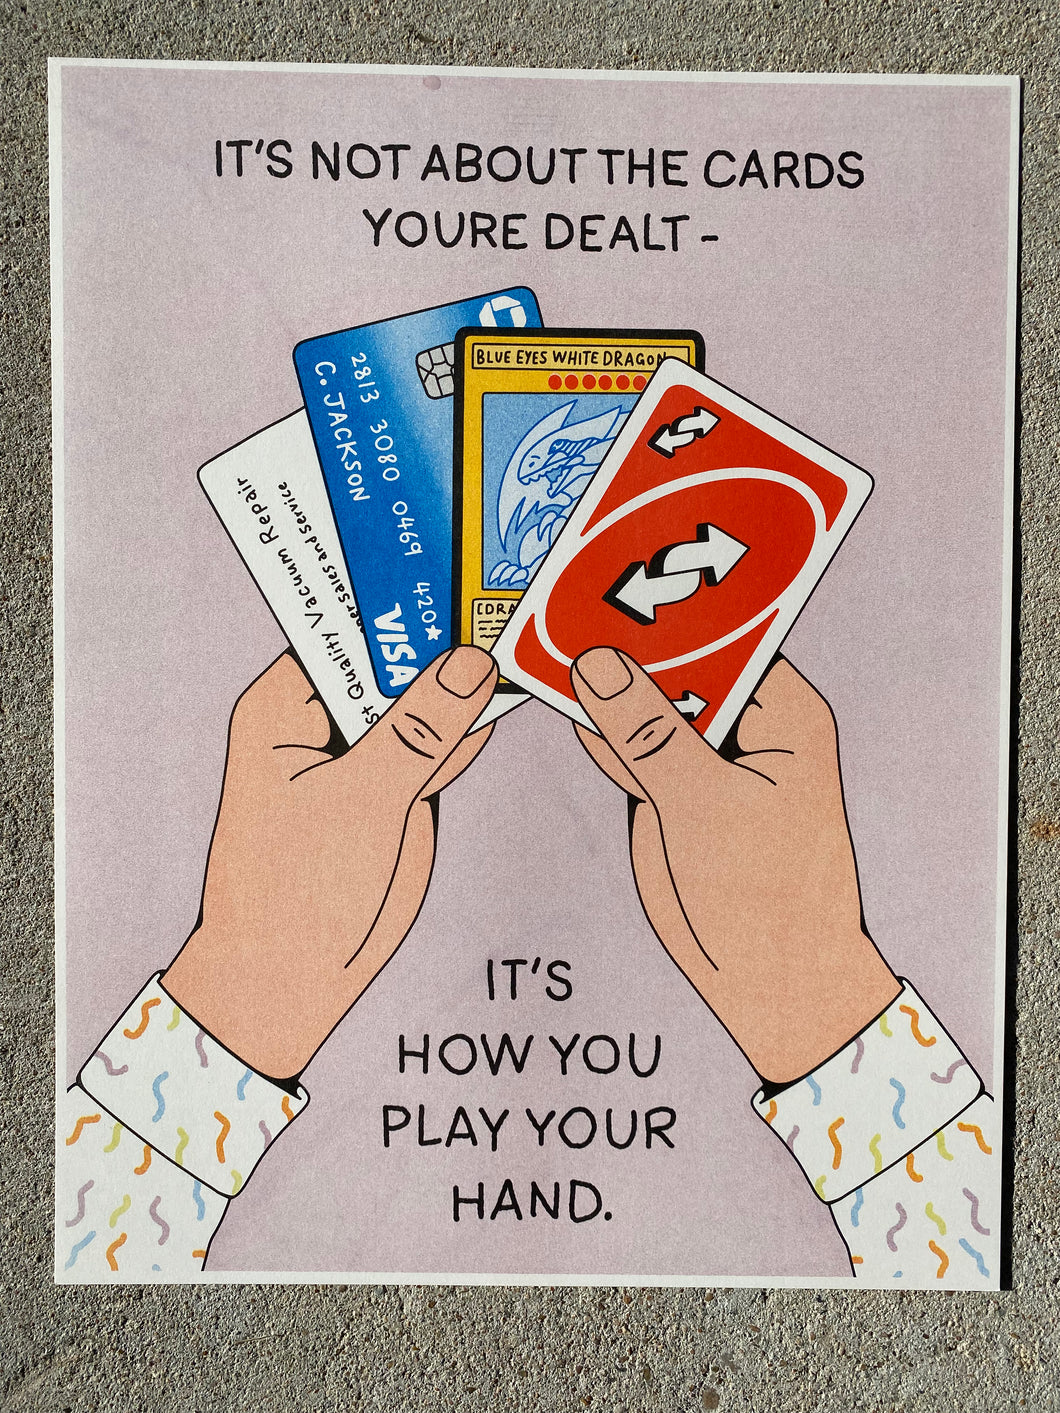 A poster with a light purple background and 2 cartoon hands holding 4 cards - a business card, a credit card and 2 game cards.  The sleeves are white with a multi-colored design that looks like small worms.  The top of the poster reads 